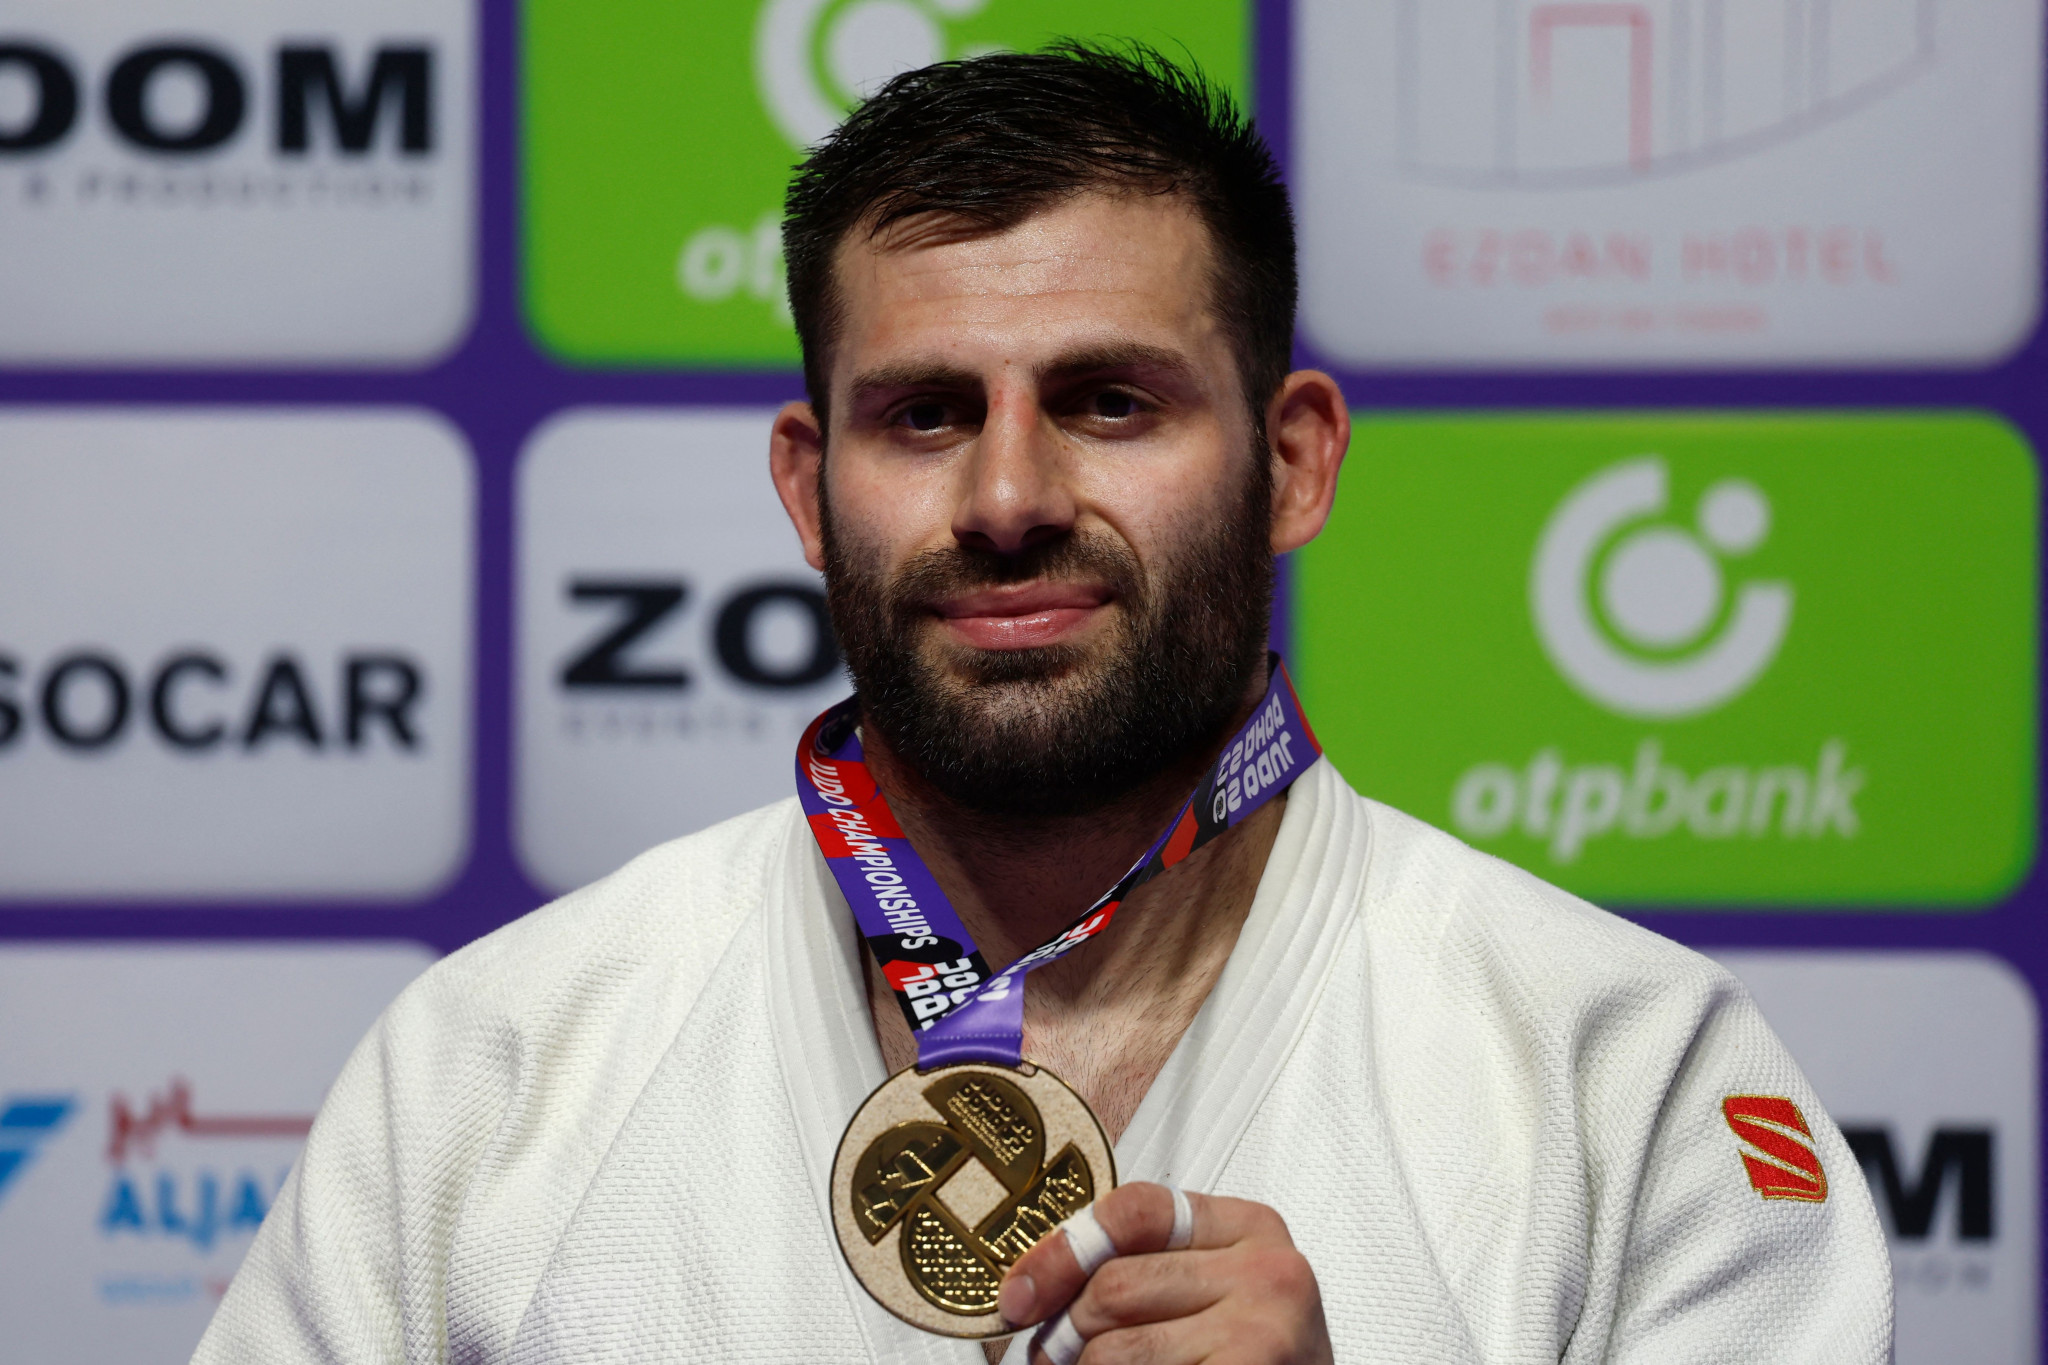 Russian judoka Arman Adamian received the gold medal before the IJF anthem was played and the Doha 2023 flag was raised ©Getty Images